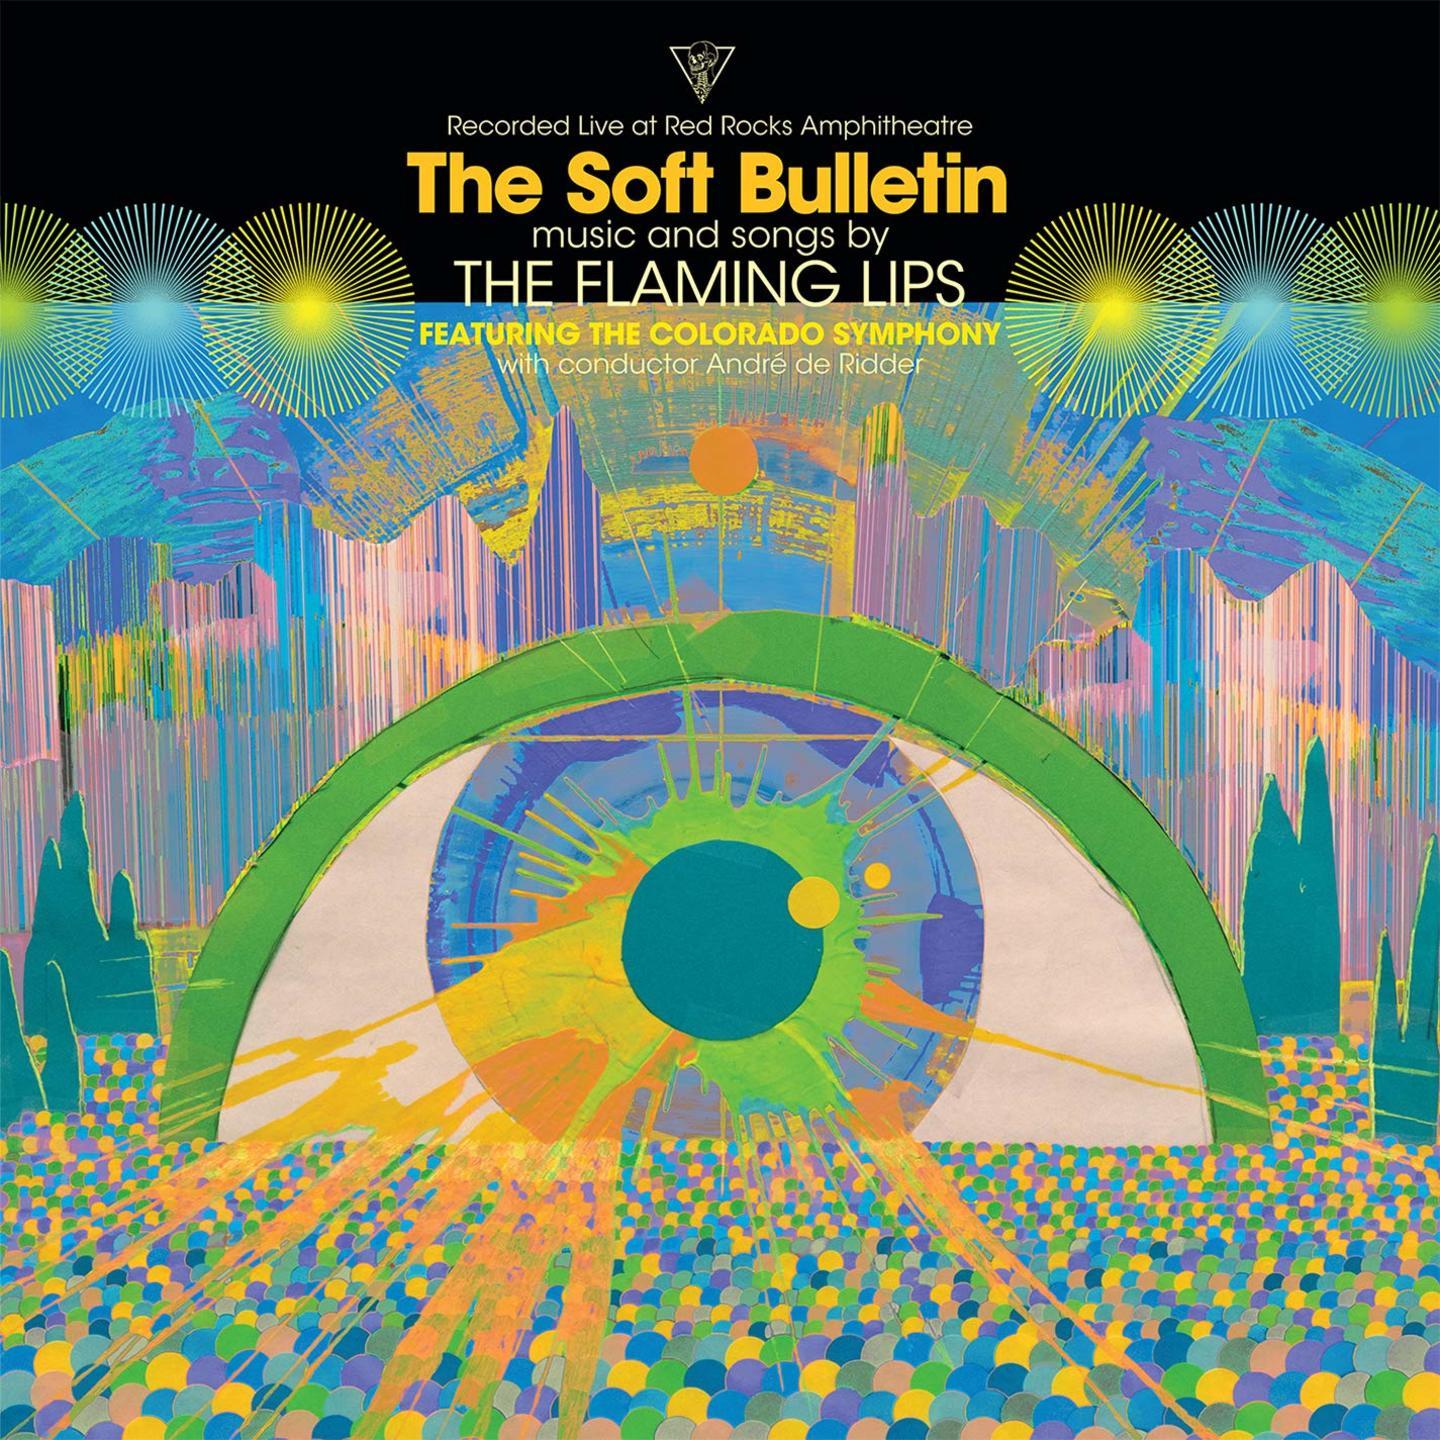 FLAMING LIPS, THE - The Soft Bulletin Live At Red Rocks 2xLP